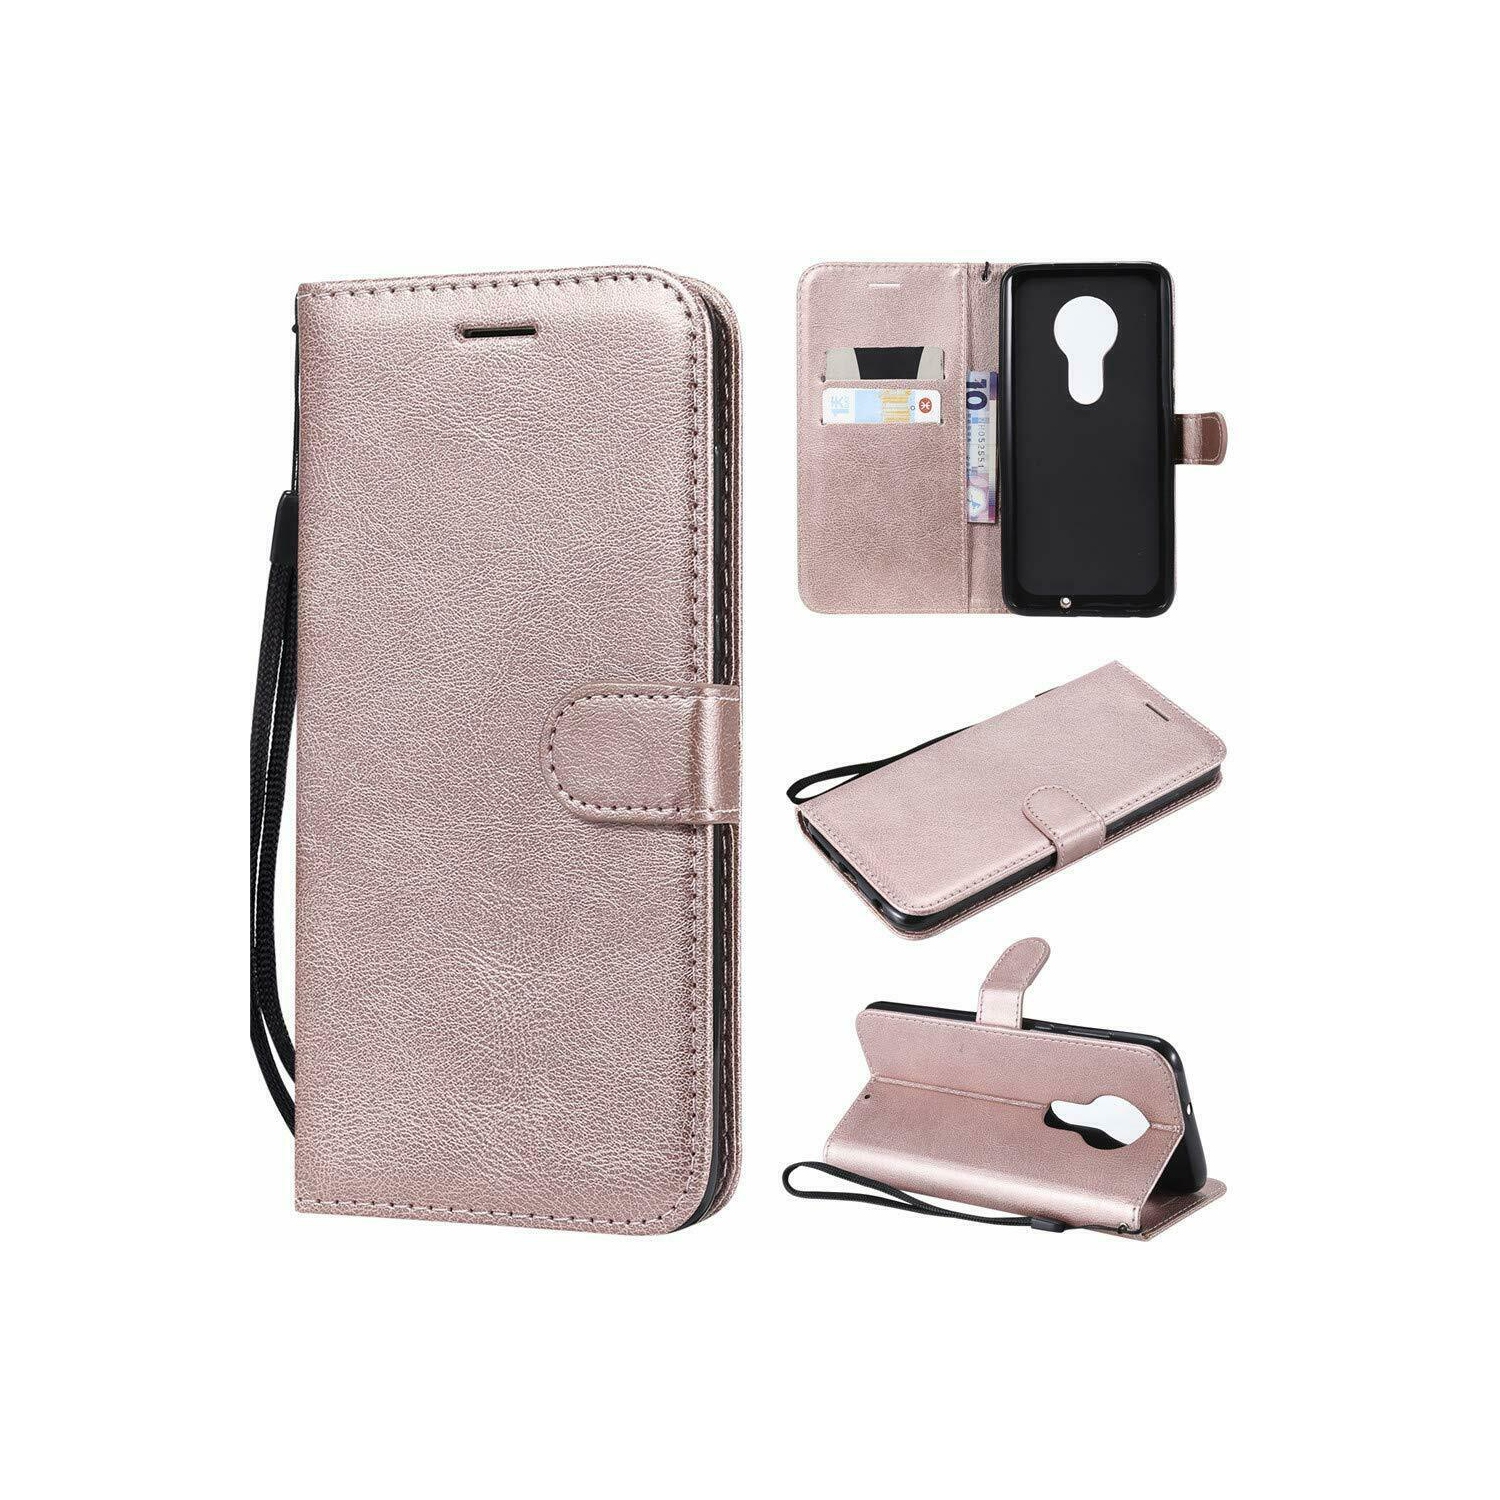 [CS] Motorola Moto G7 Play Case, Magnetic Leather Folio Wallet Flip Case Cover with Card Slot, Rose Gold